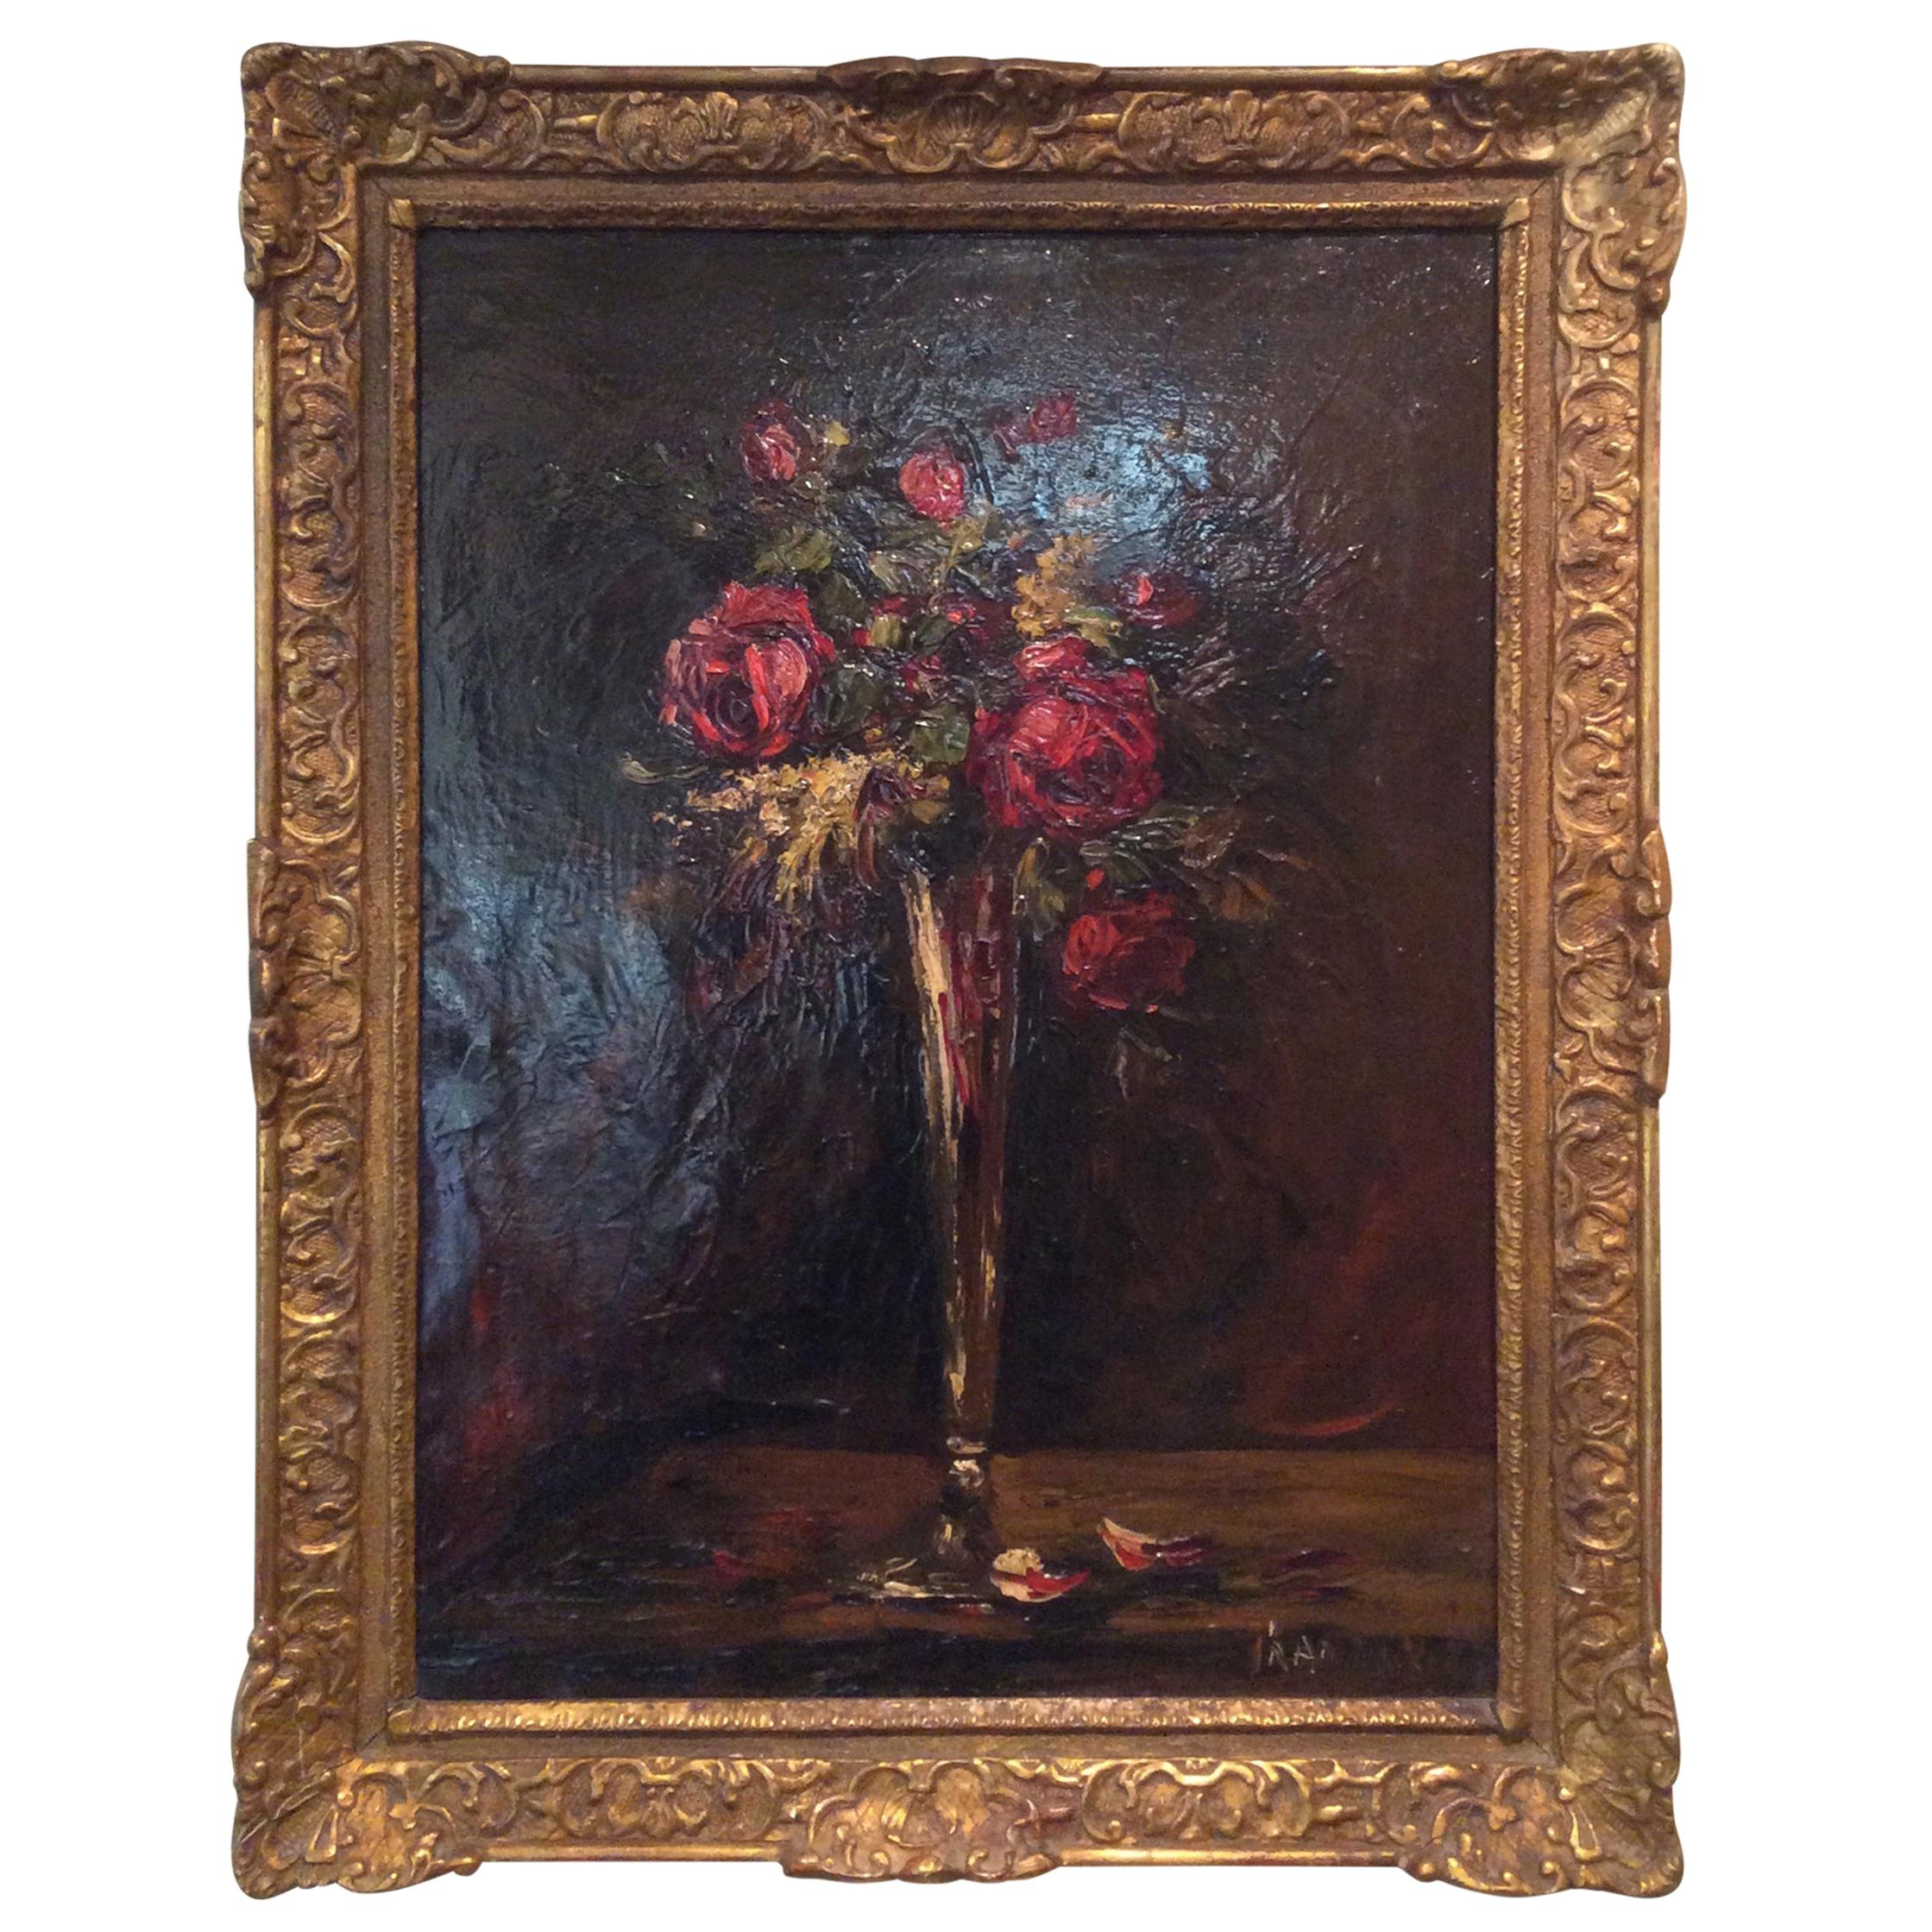 French Still Life Painting by Charles Franzini d’Issoncourt in Giltwood Frame